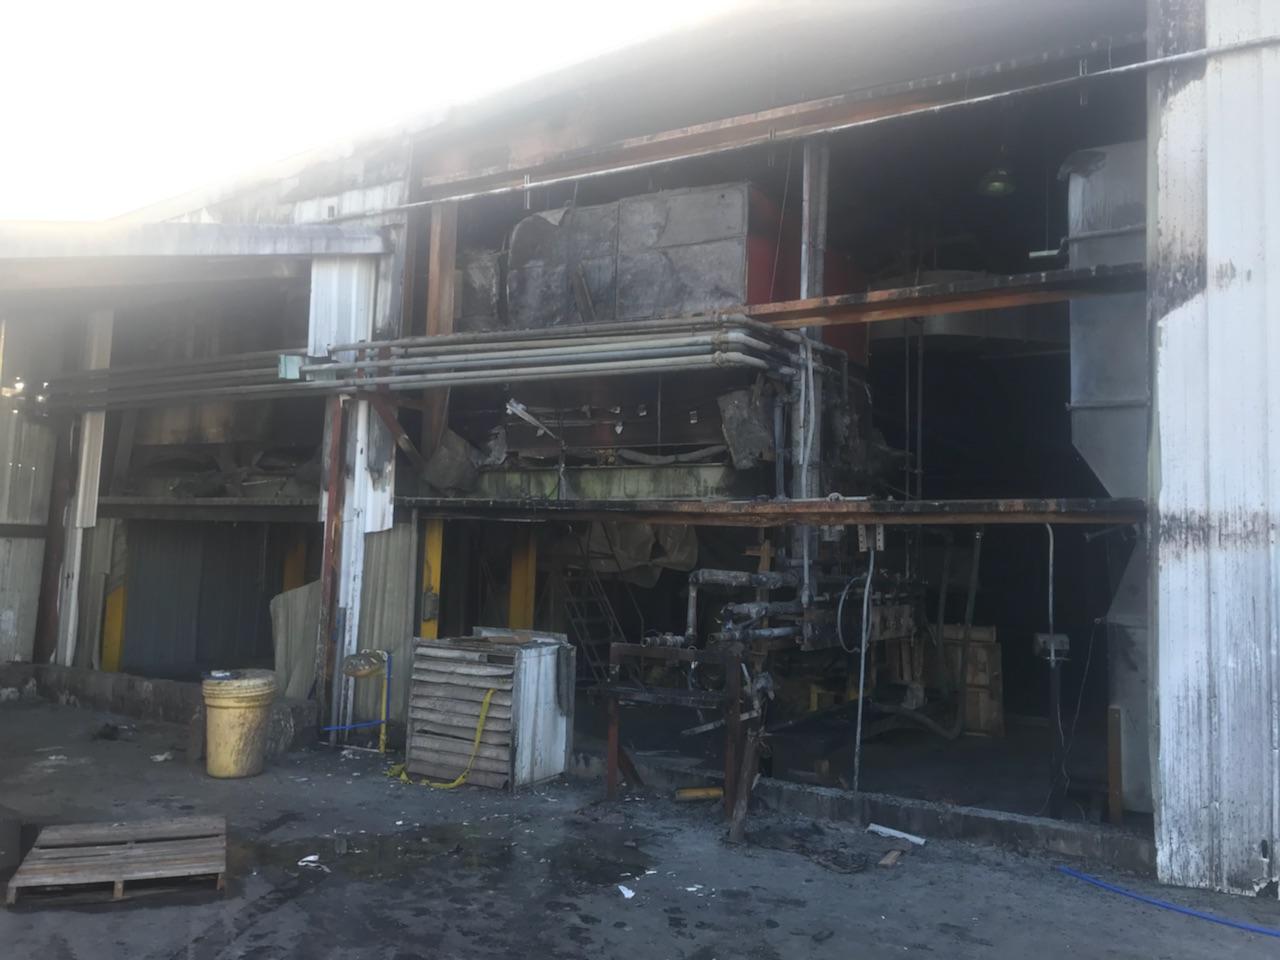 Commercial fire damage restoration and cleanup is what our SERVPRO of Lafayette team is here for!